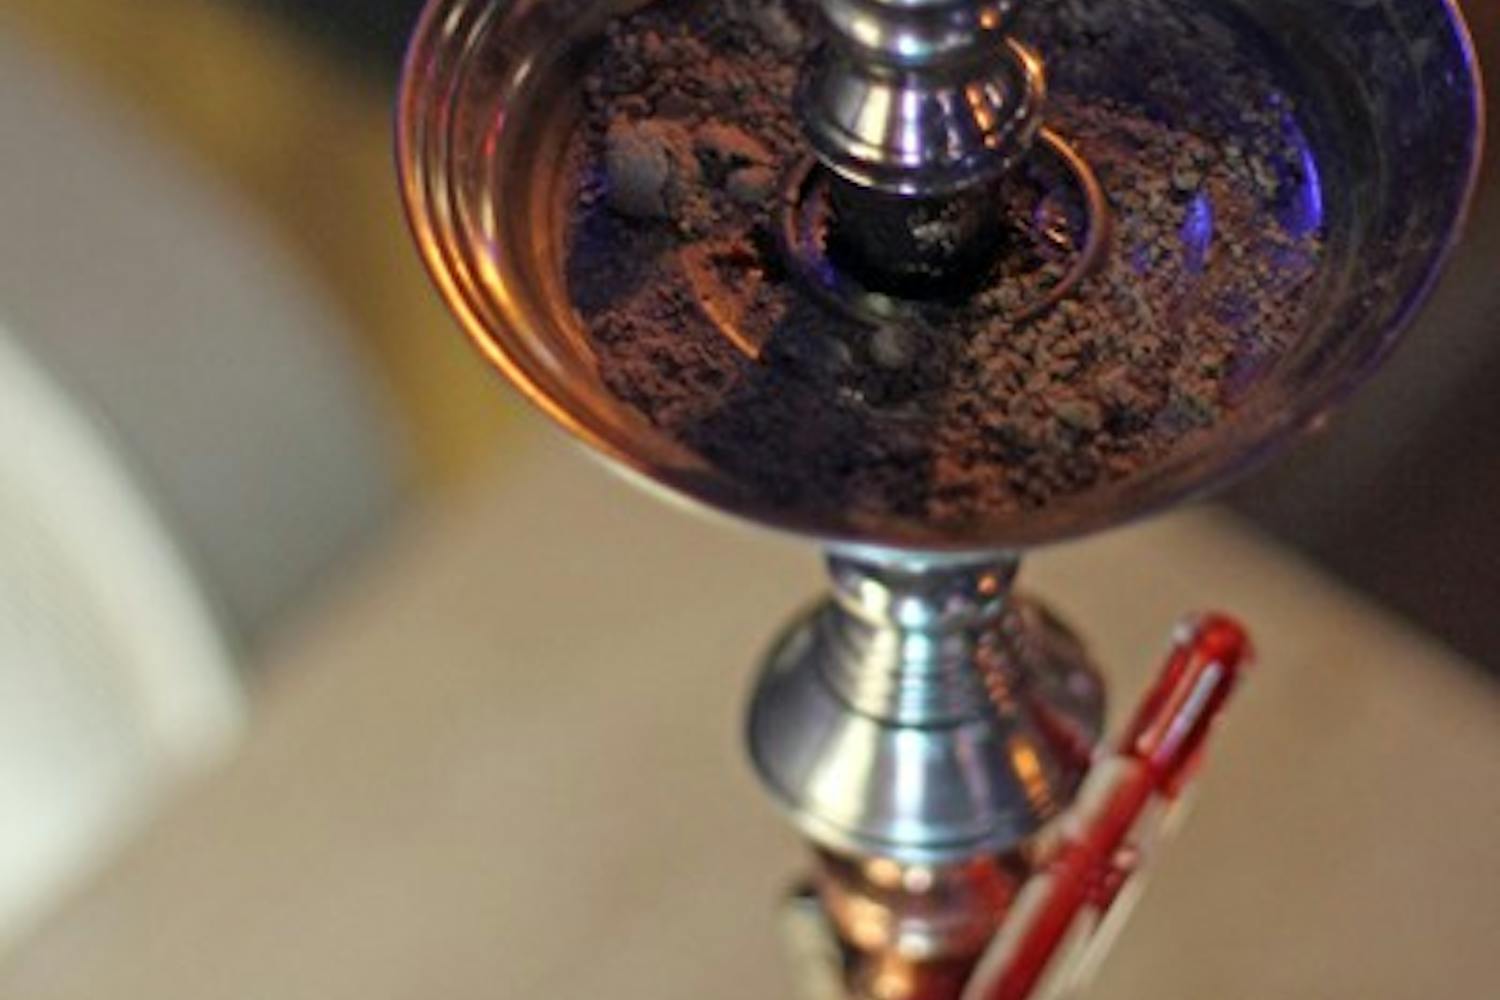 Arizona Representative Kimberly Yee is sponsoring a bill in the House of Representatives that would prohibit minors from purchasing or possessing hookah pipes and hookah due to the health risks attached with smoking.  (Photo by Lisa Bartoli)